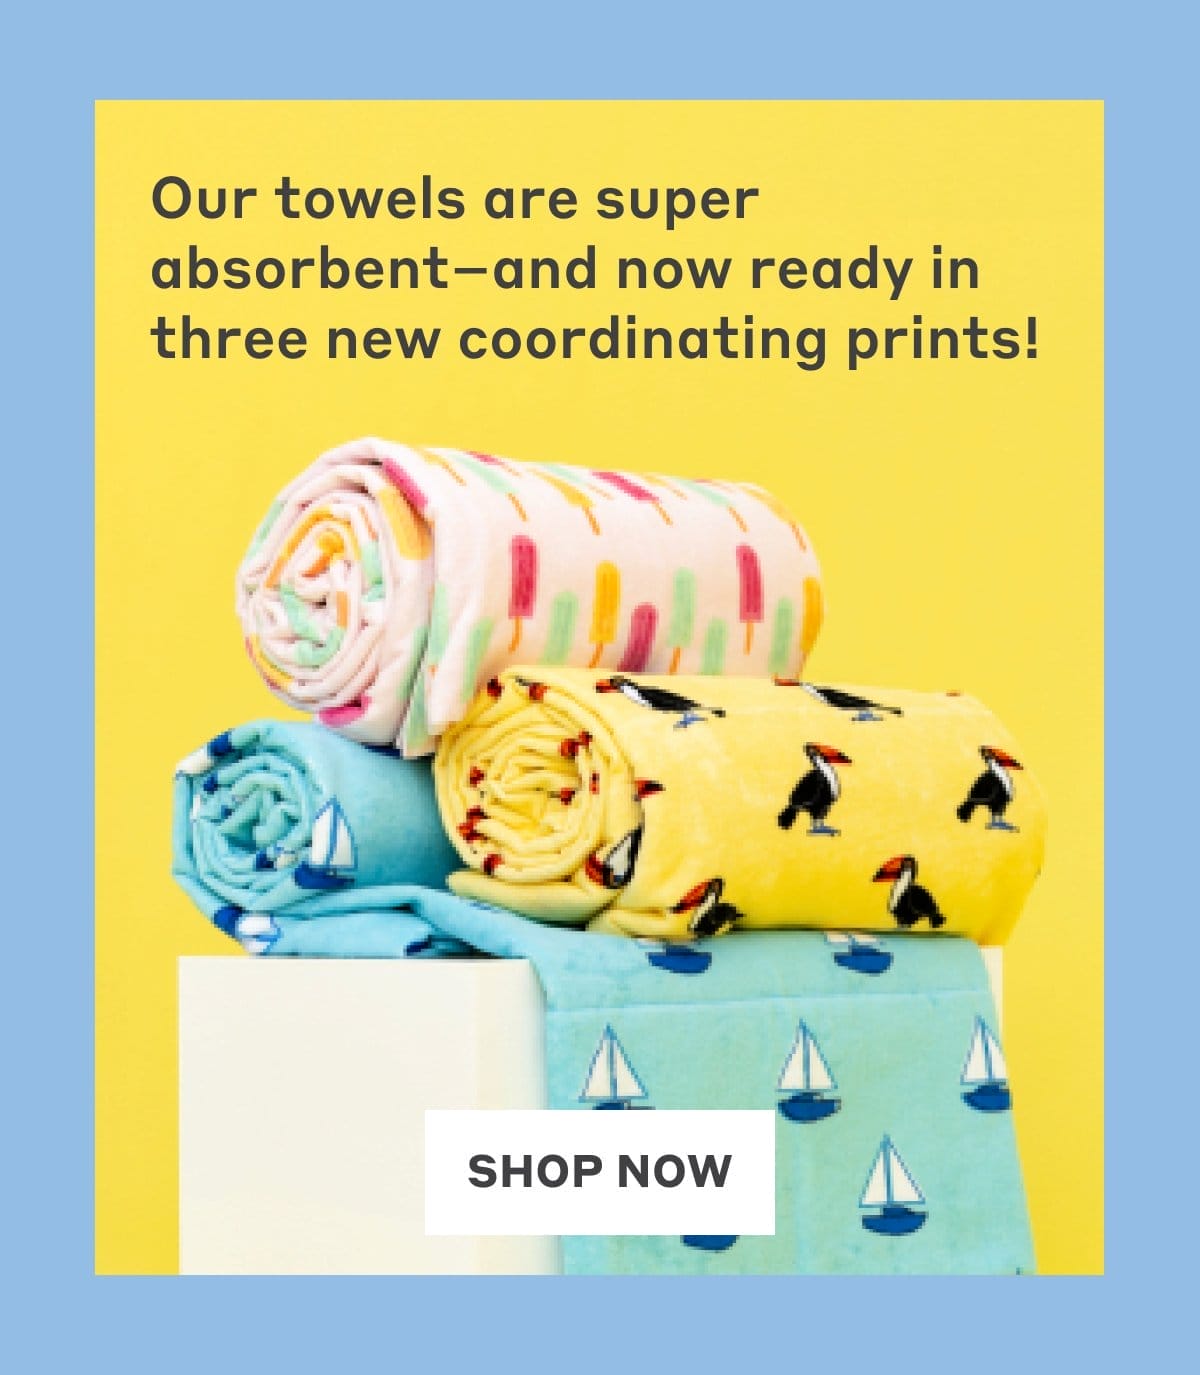 Our towels are super absorbent - and now ready in three new coordinating prints!